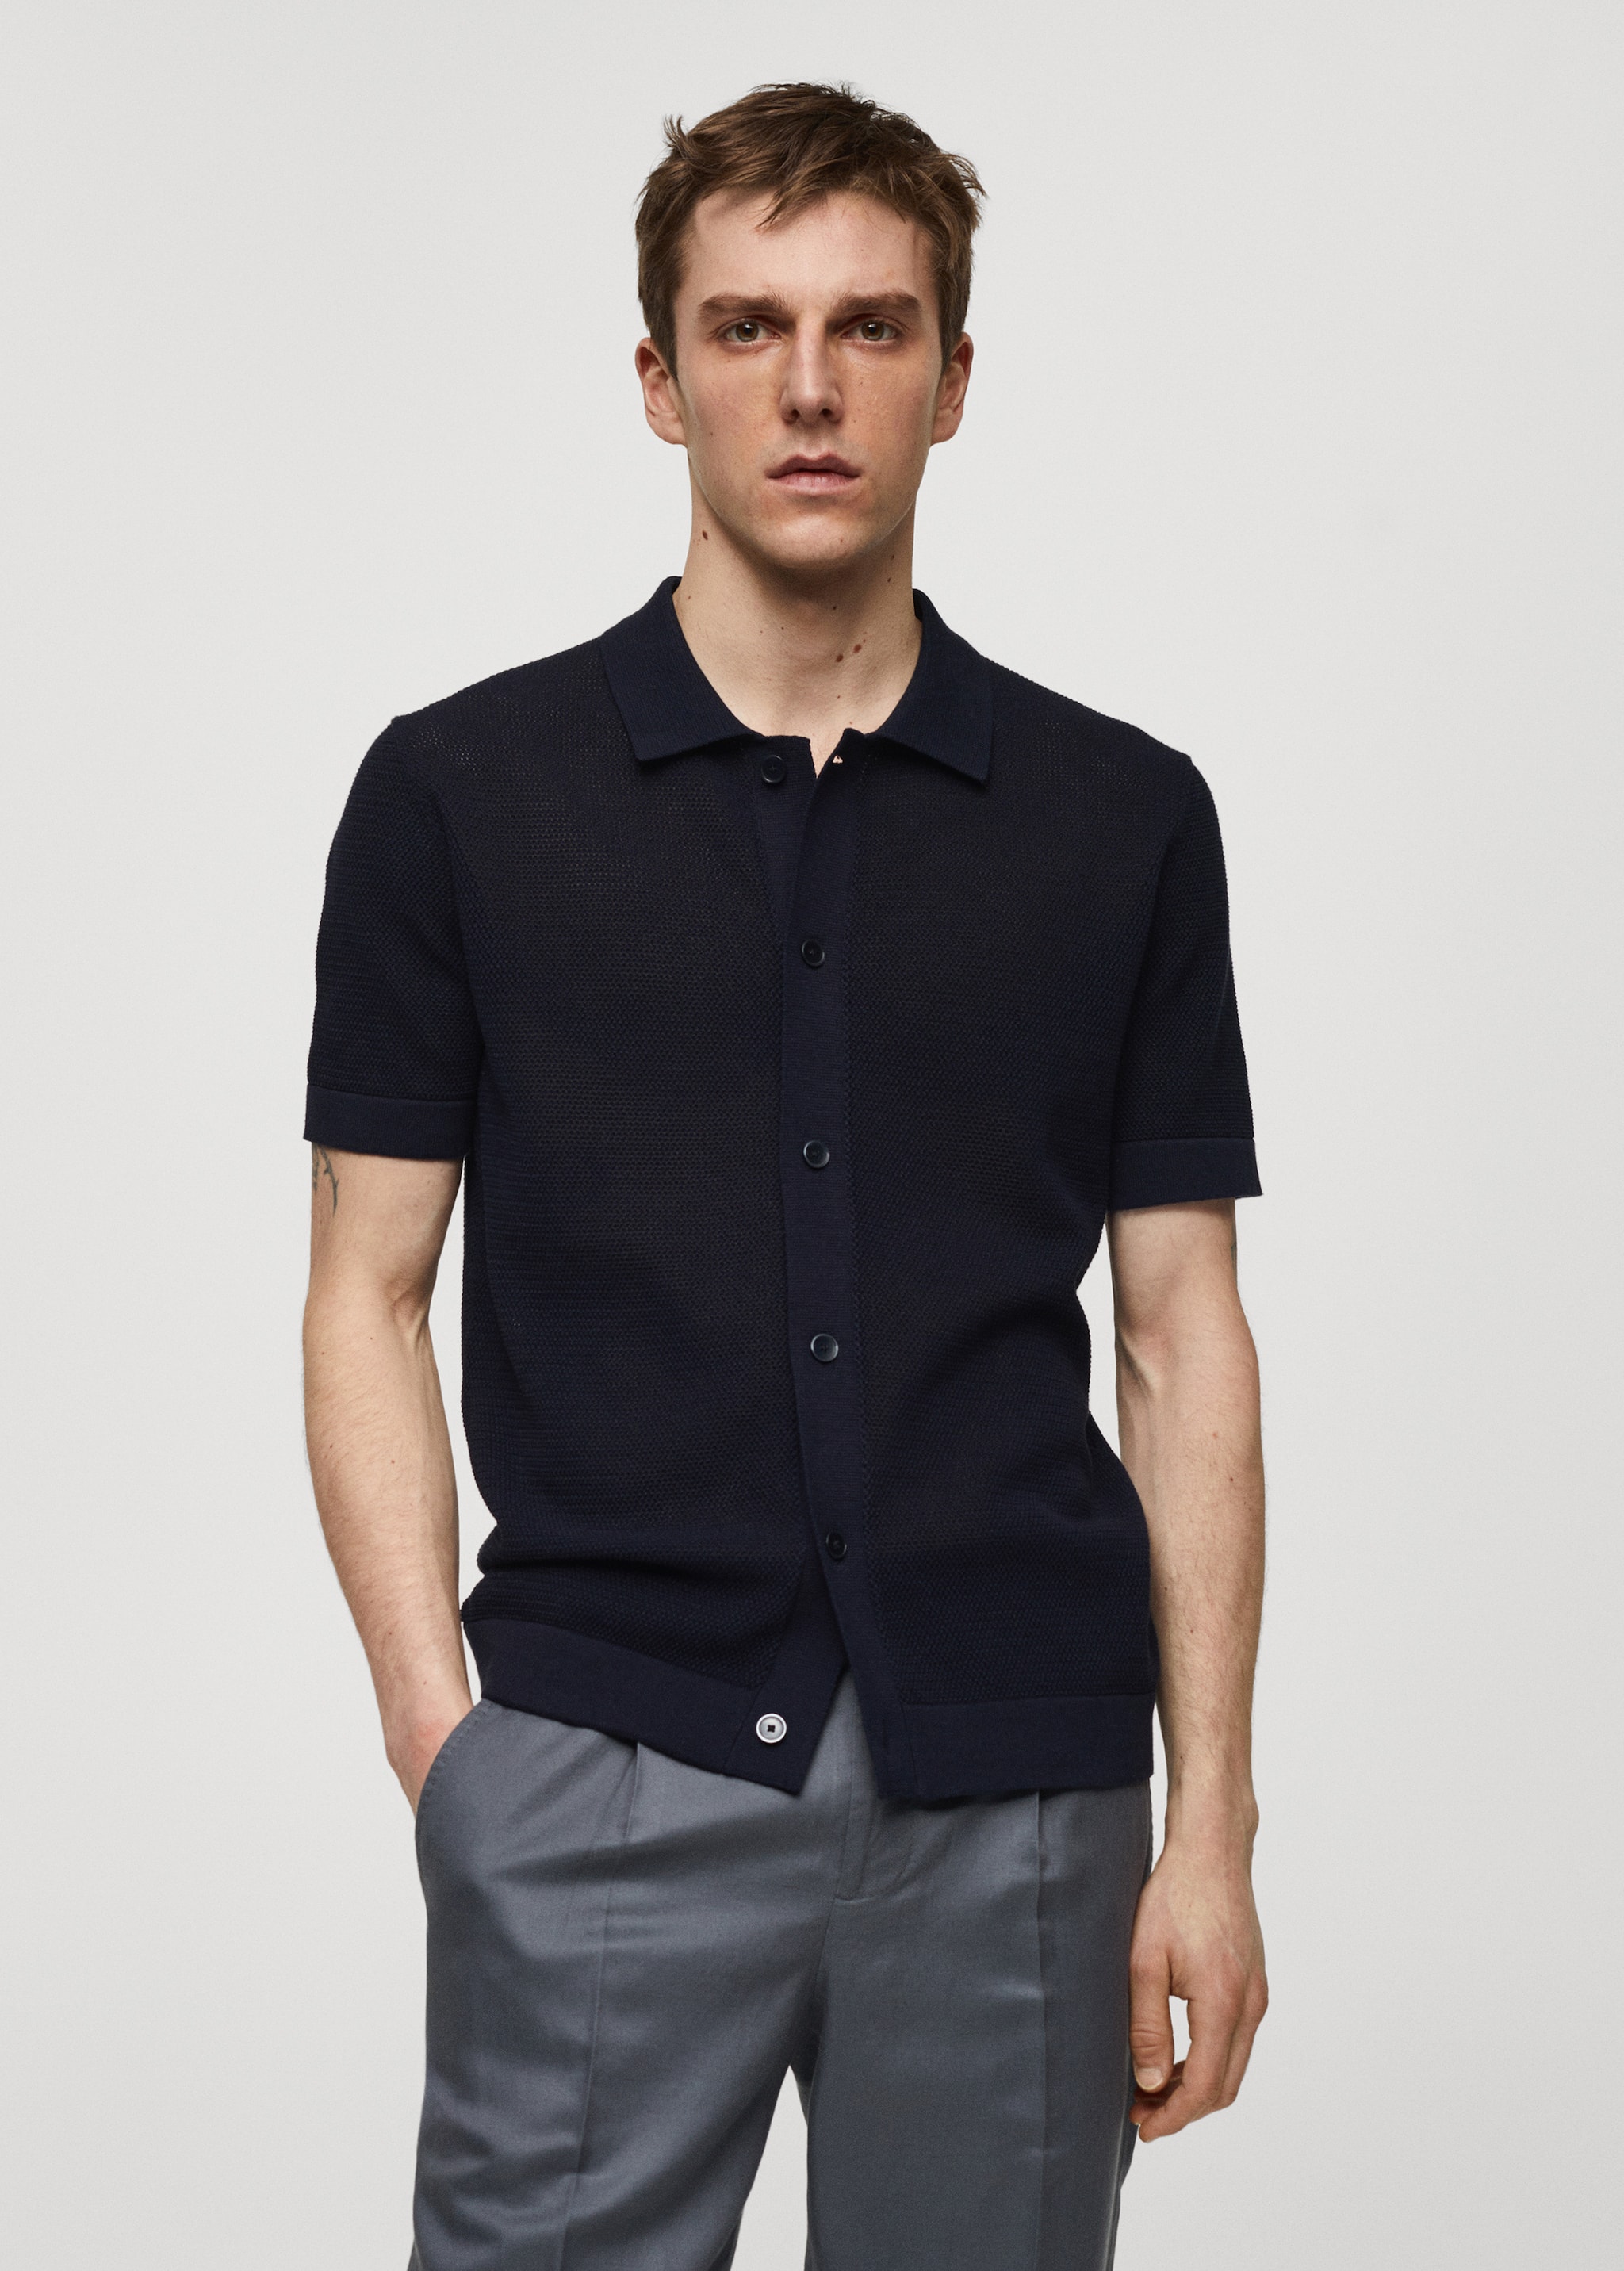 Knitted polo shirt with buttons - Medium plane